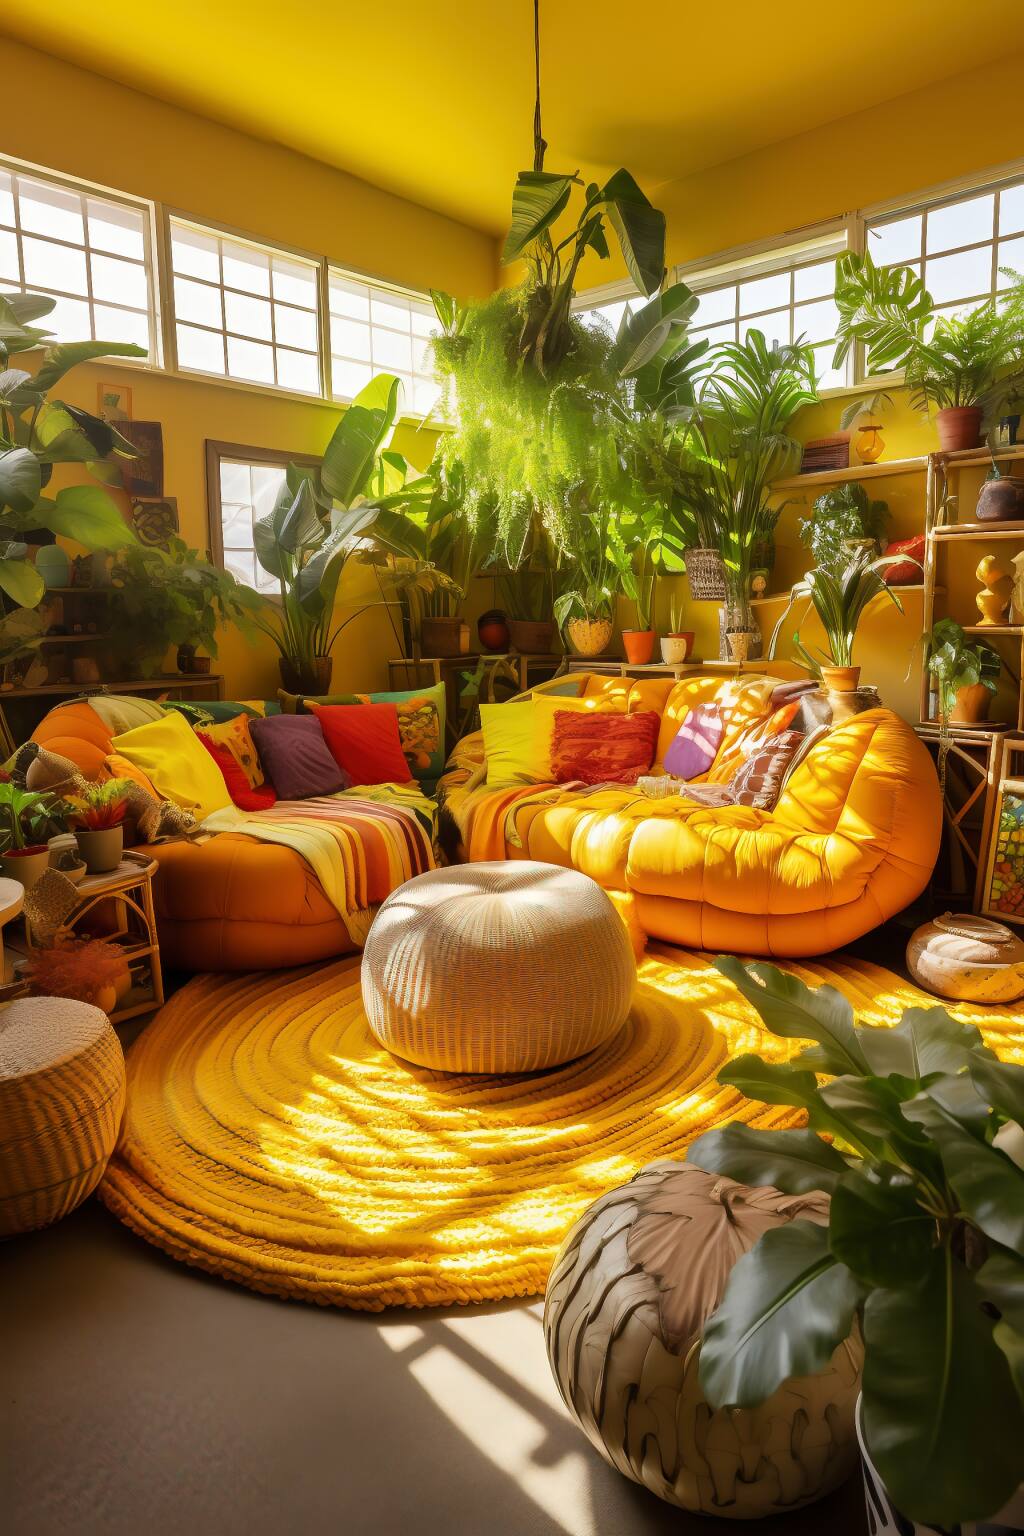 Tropical Bohemian Living Room In Green And Yellow, Featuring Bamboo Furniture, Leaf Print Cushions, And Hanging Ferns.